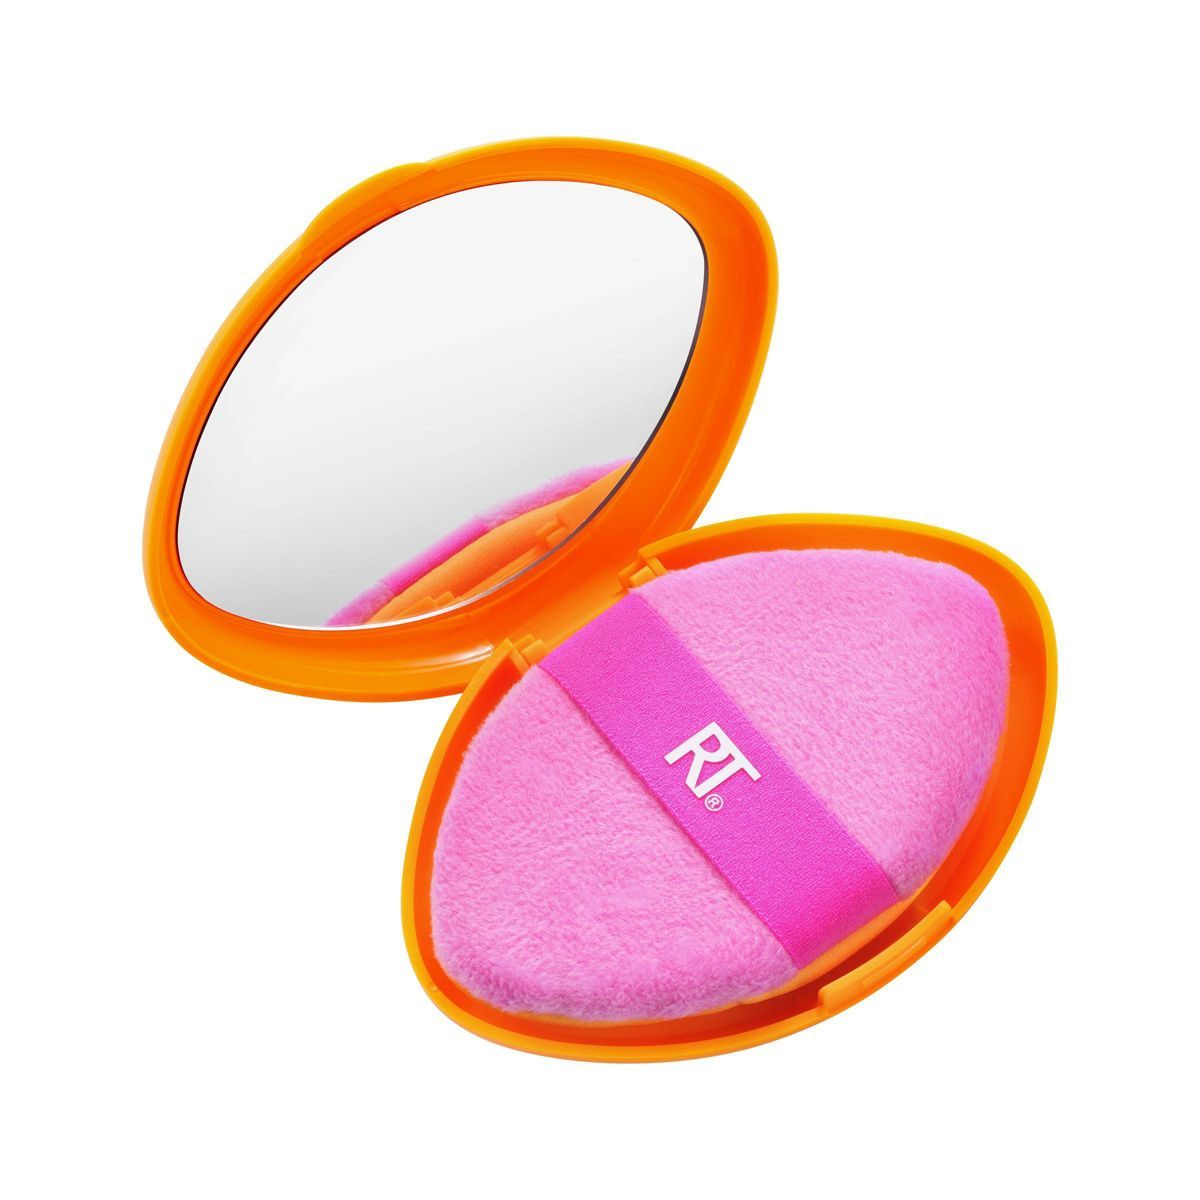 Real Techniques 2-in-1 Powder Applicator Puff & Case | Target